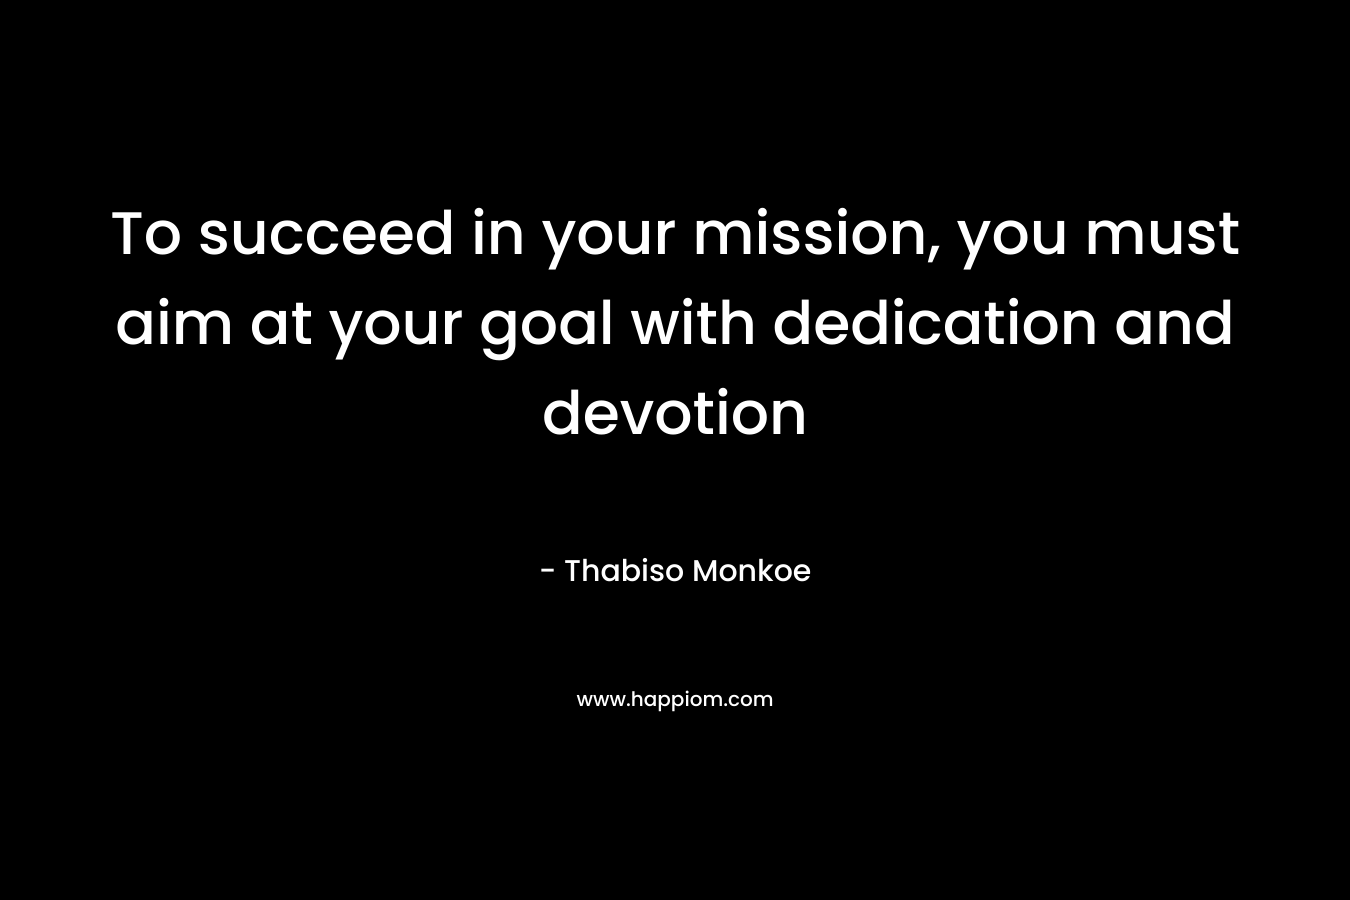 To succeed in your mission, you must aim at your goal with dedication and devotion